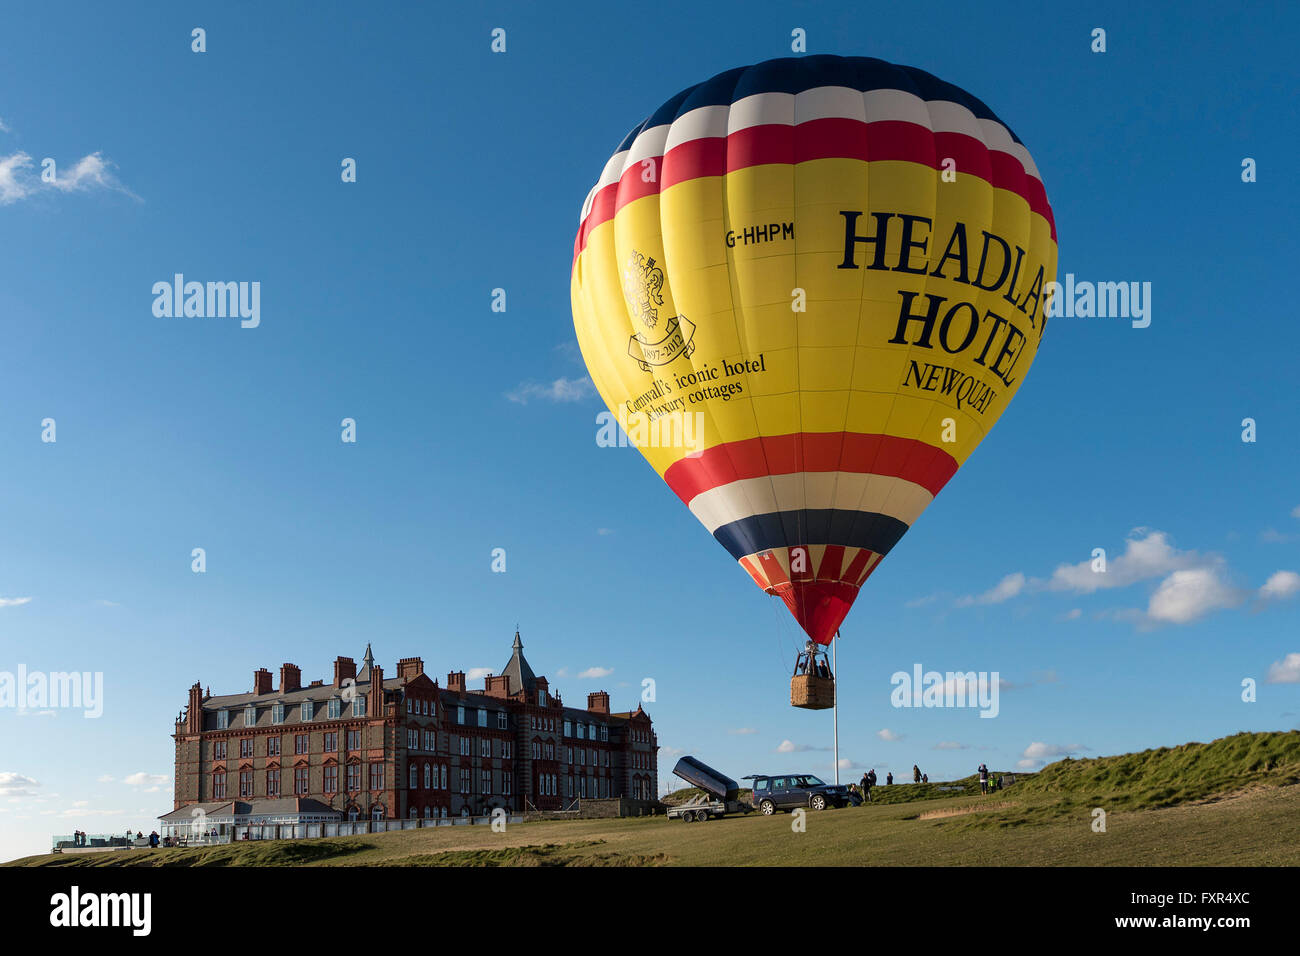 Headland Hotel, Newquay, Cornwall, 17th April 2016.   The spectacular launch of a colourful hot air balloon as it takes to the sky above the Headland Hotel in Newquay, Cornwall.  Photographer;  Gordon Scammell/Alamy Live News Stock Photo